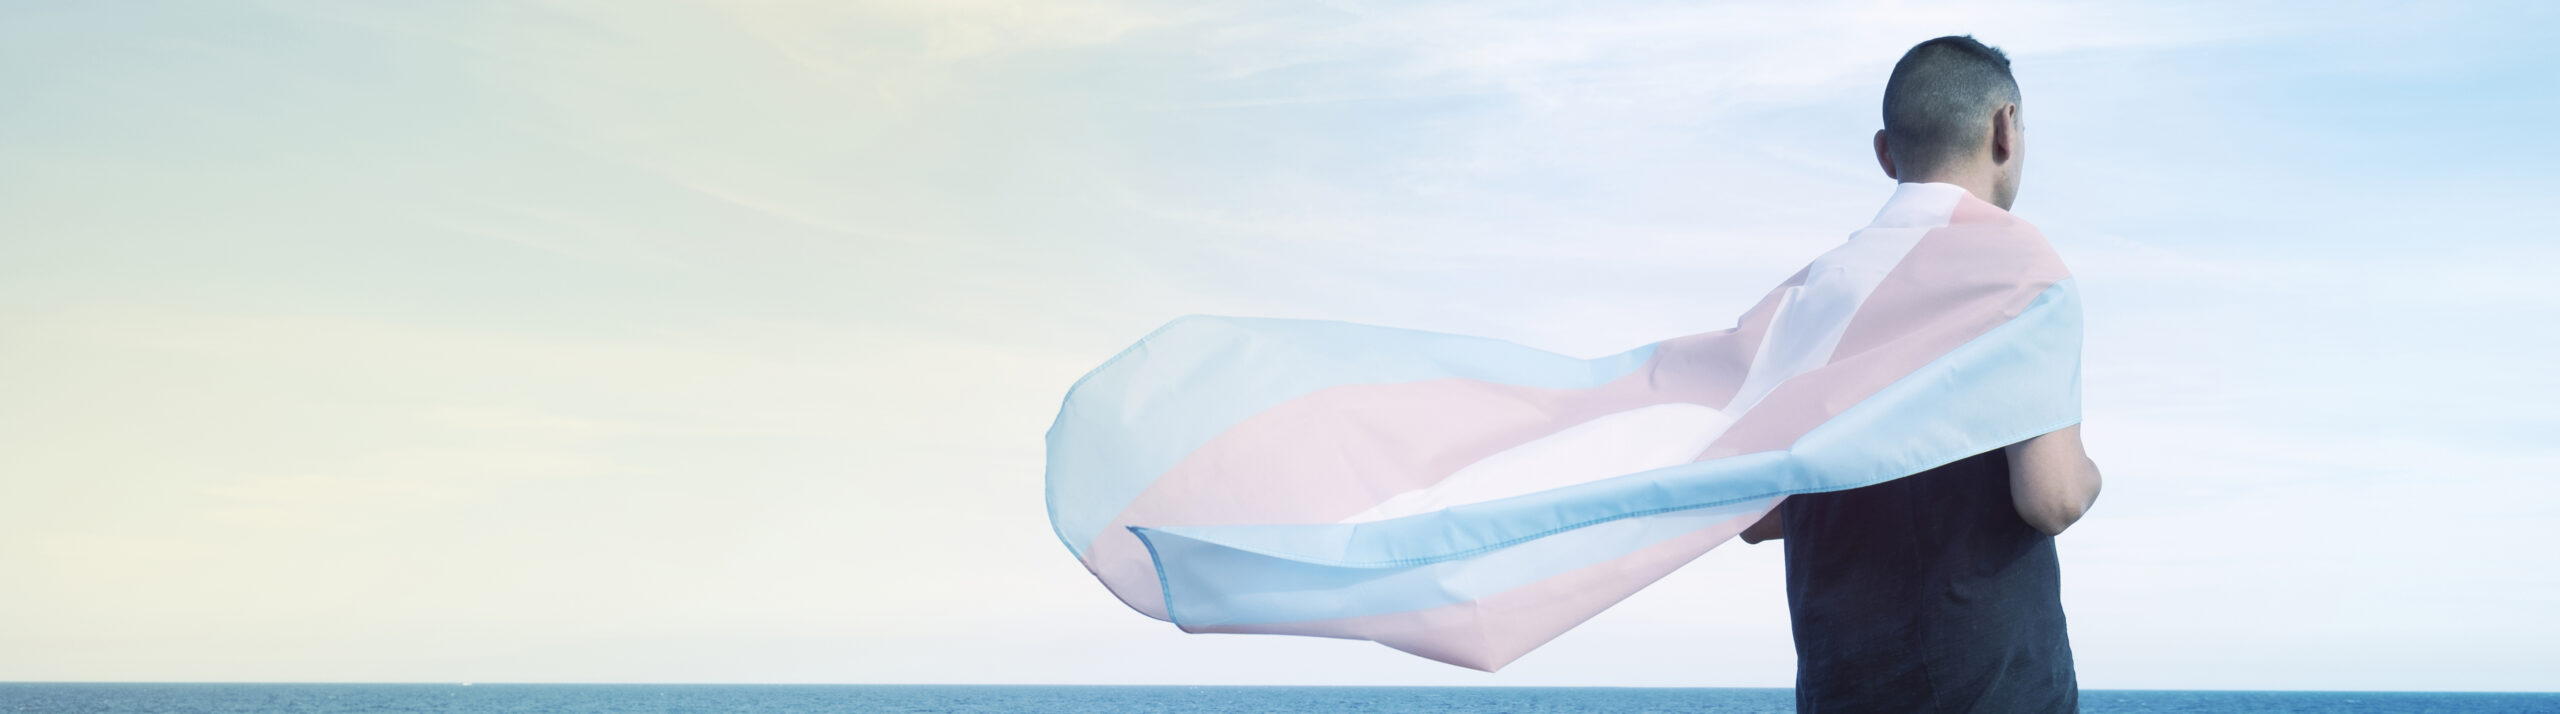 person wrapped in a transgender flag, web banner